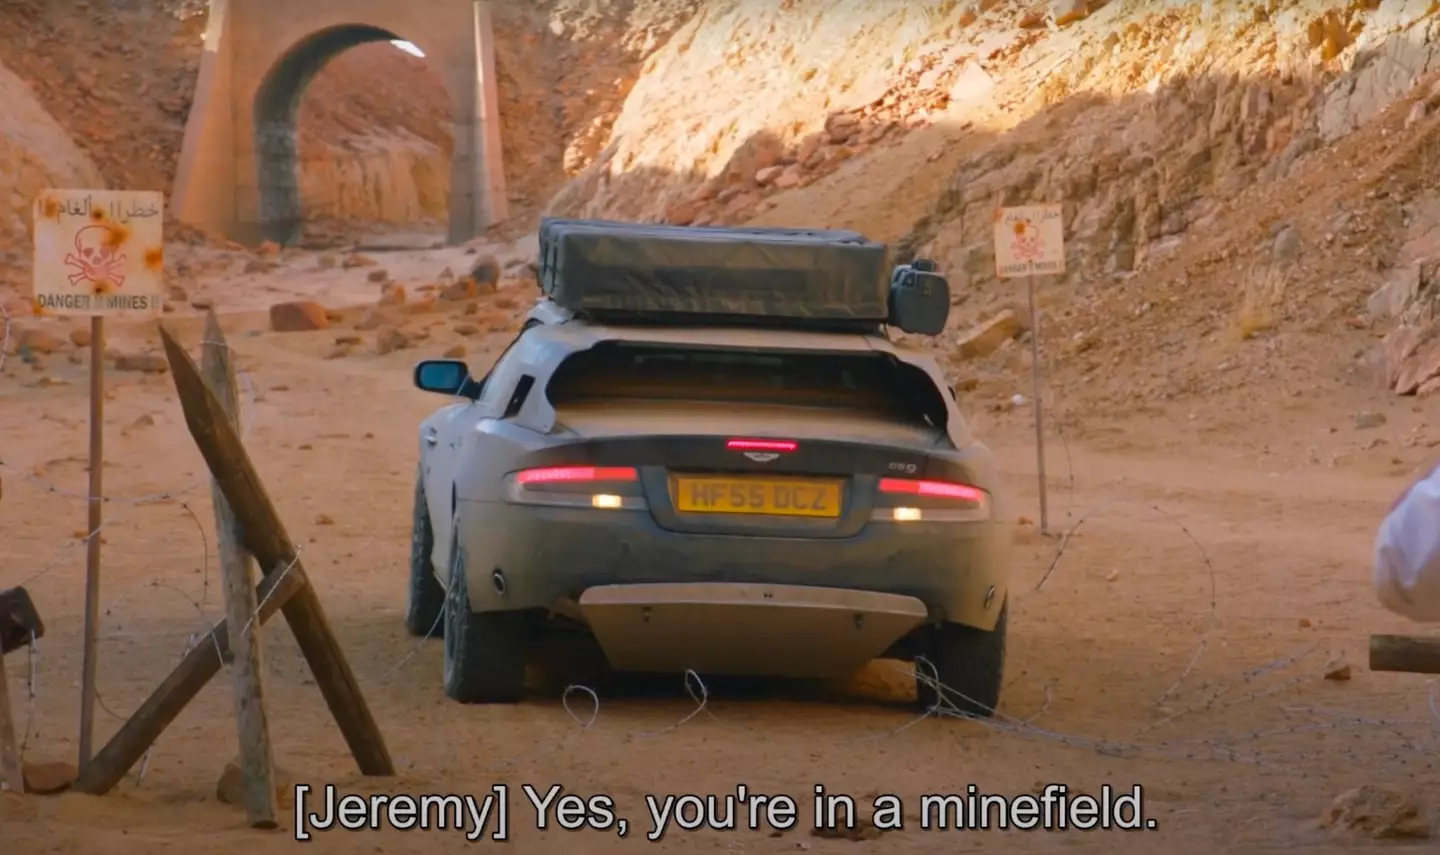 Hammond's car looked to have driven well into the minefield.